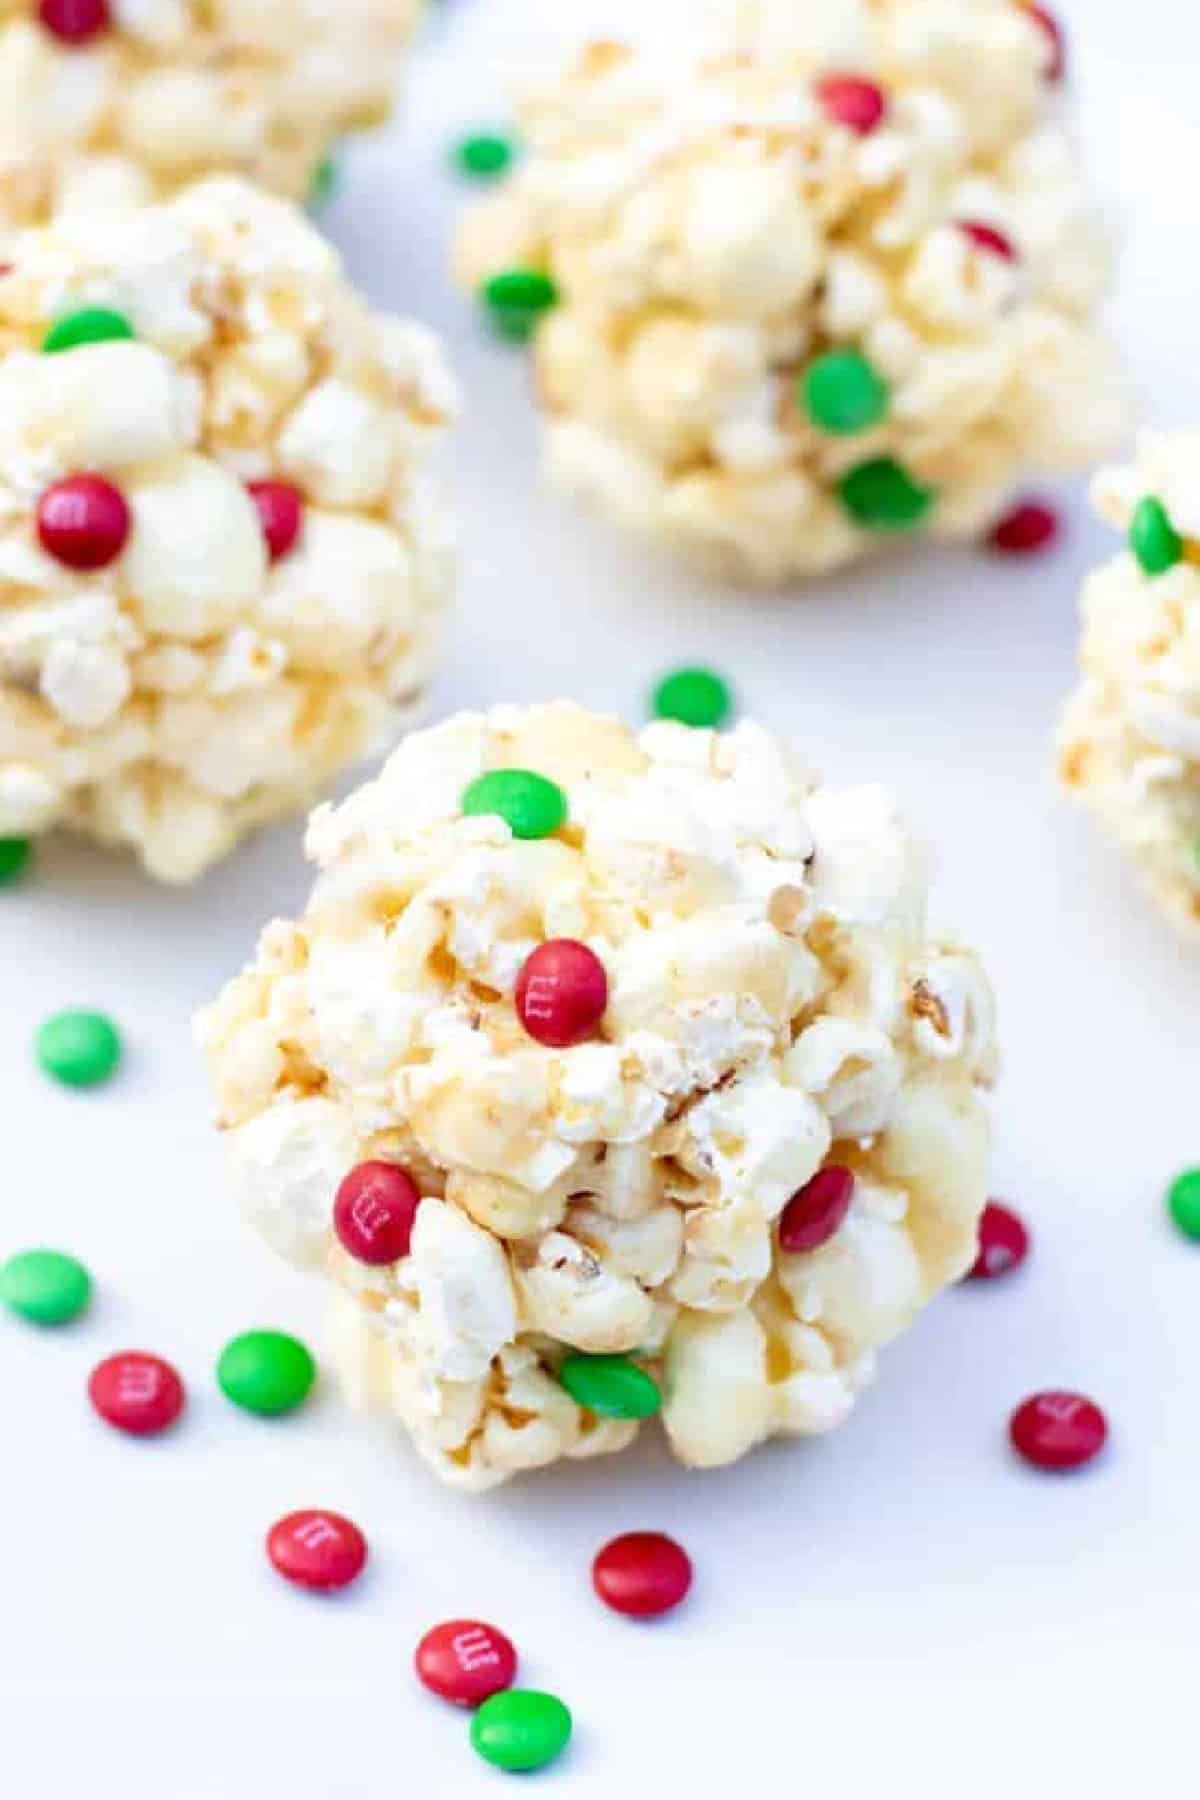 a close up of a popcorn ball with christmas colored m&ms.